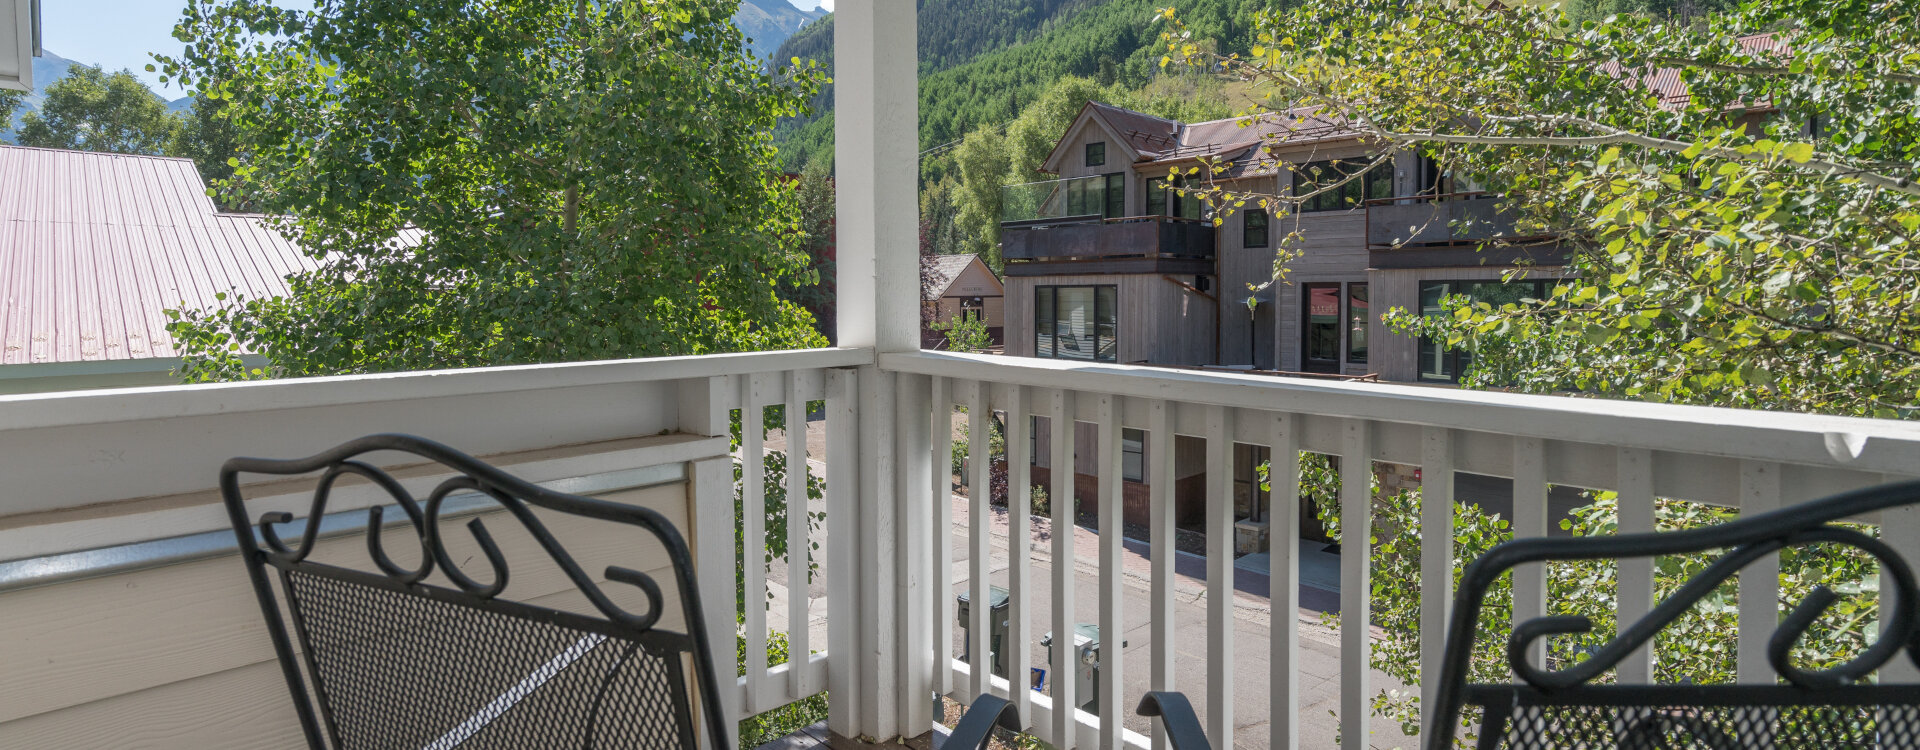 3.02-telluride-south-pacific-new-master-bedroom-private-balcony-web